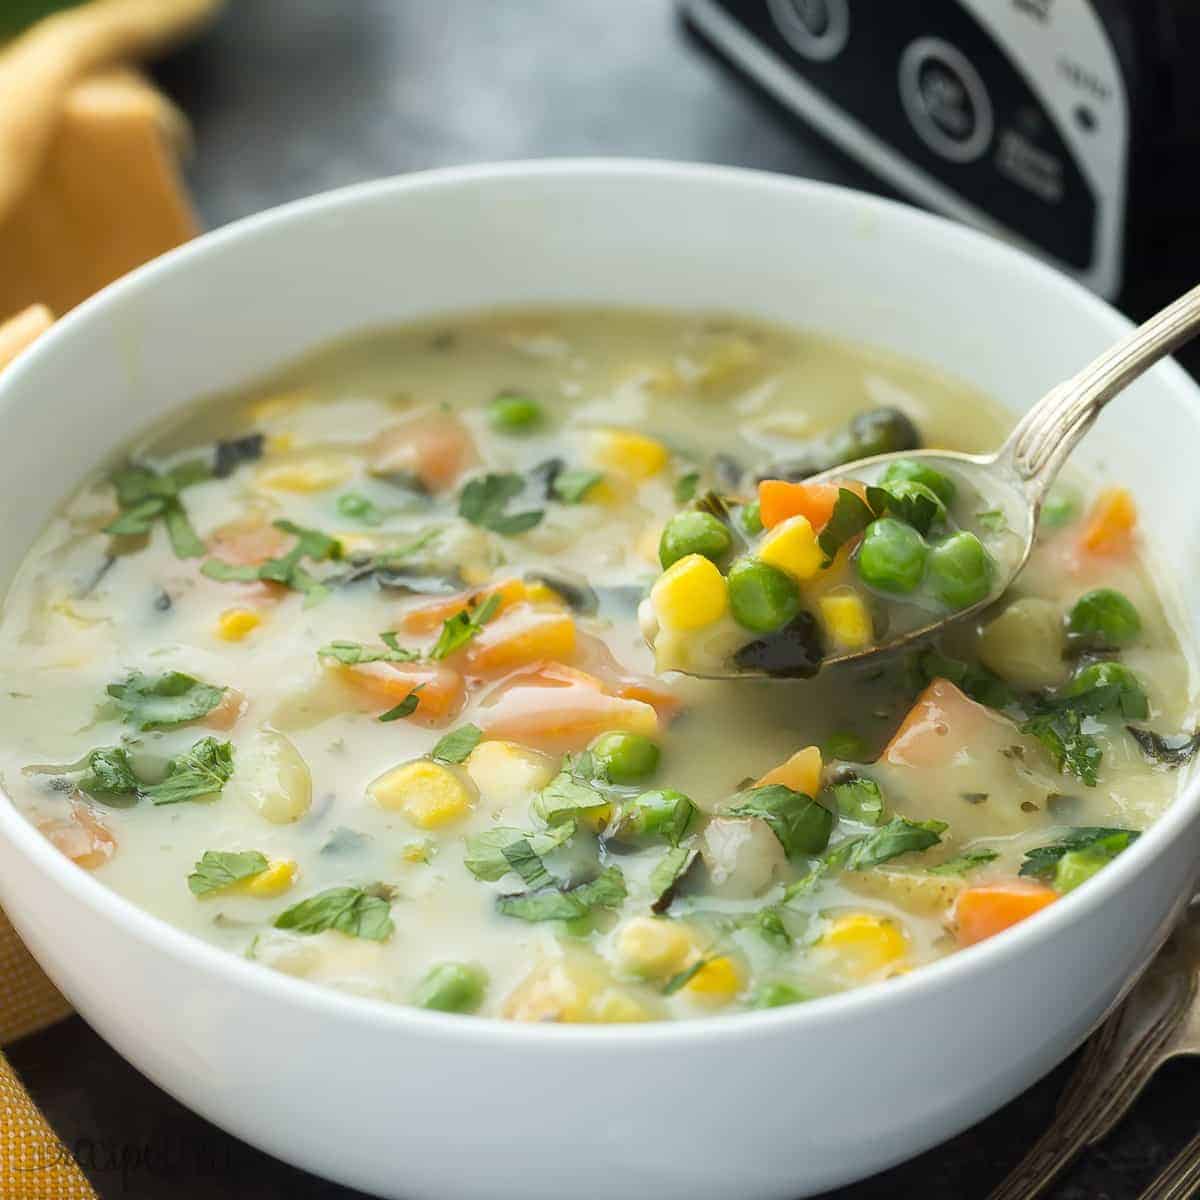 Slow Cooker Creamy Vegetable Soup